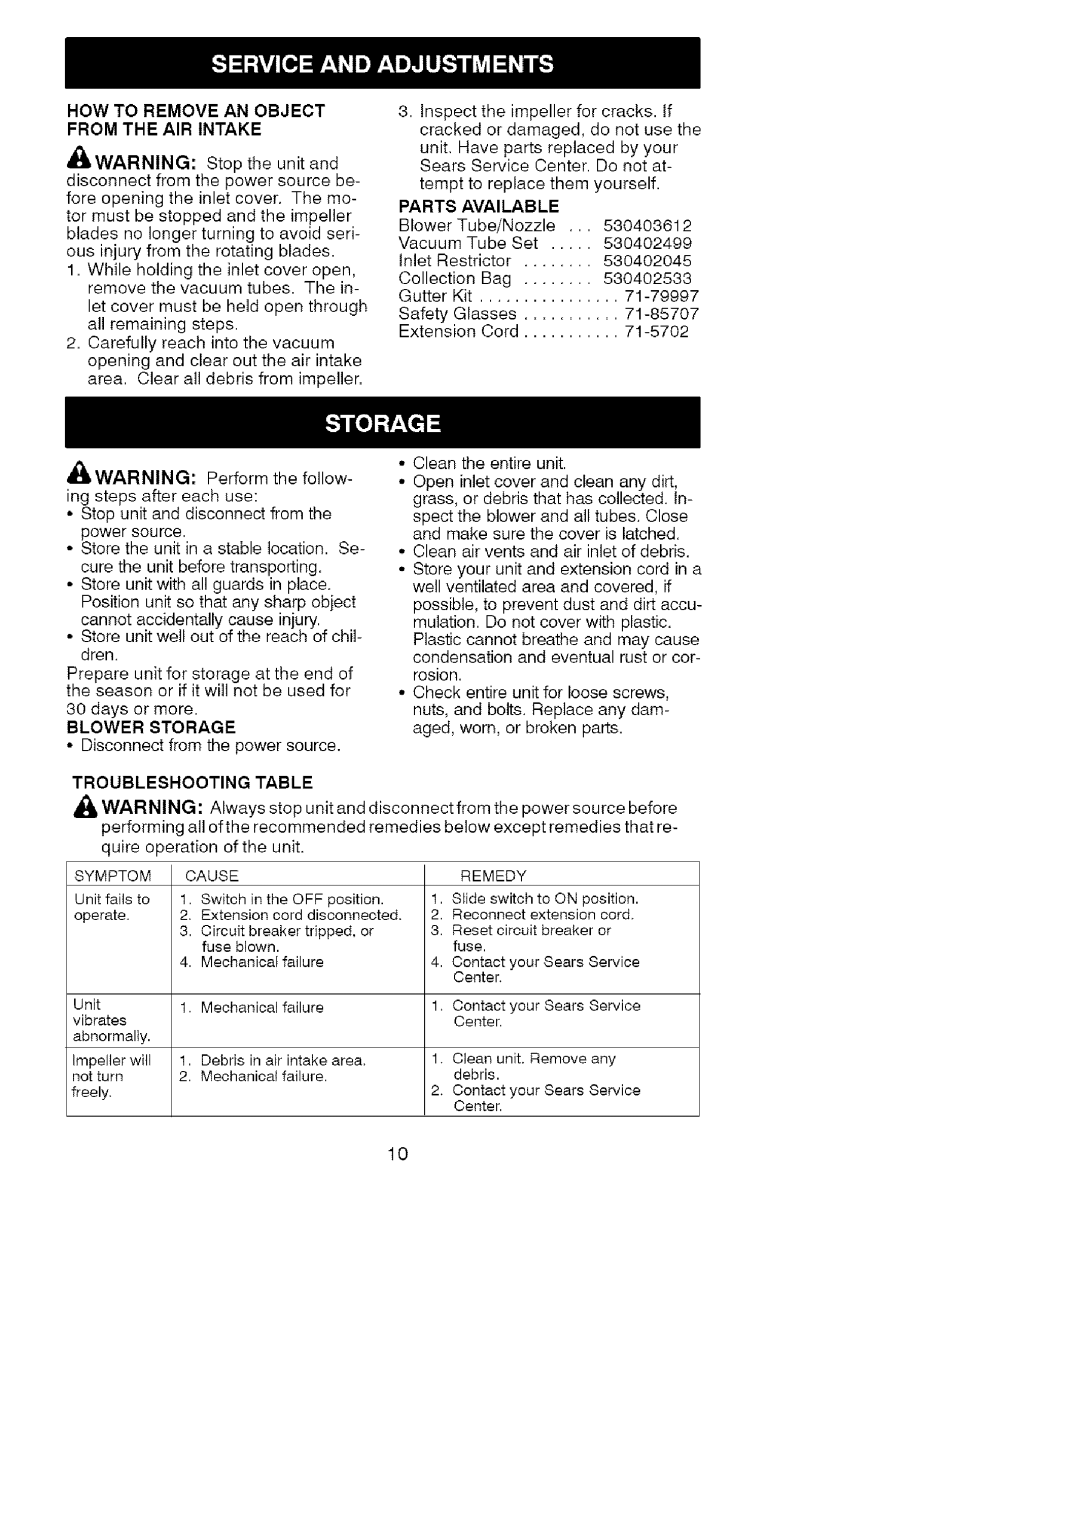 Craftsman 358.799430 manual How To Remove An Object From The Air Intake, Troubleshooting Table, Parts 